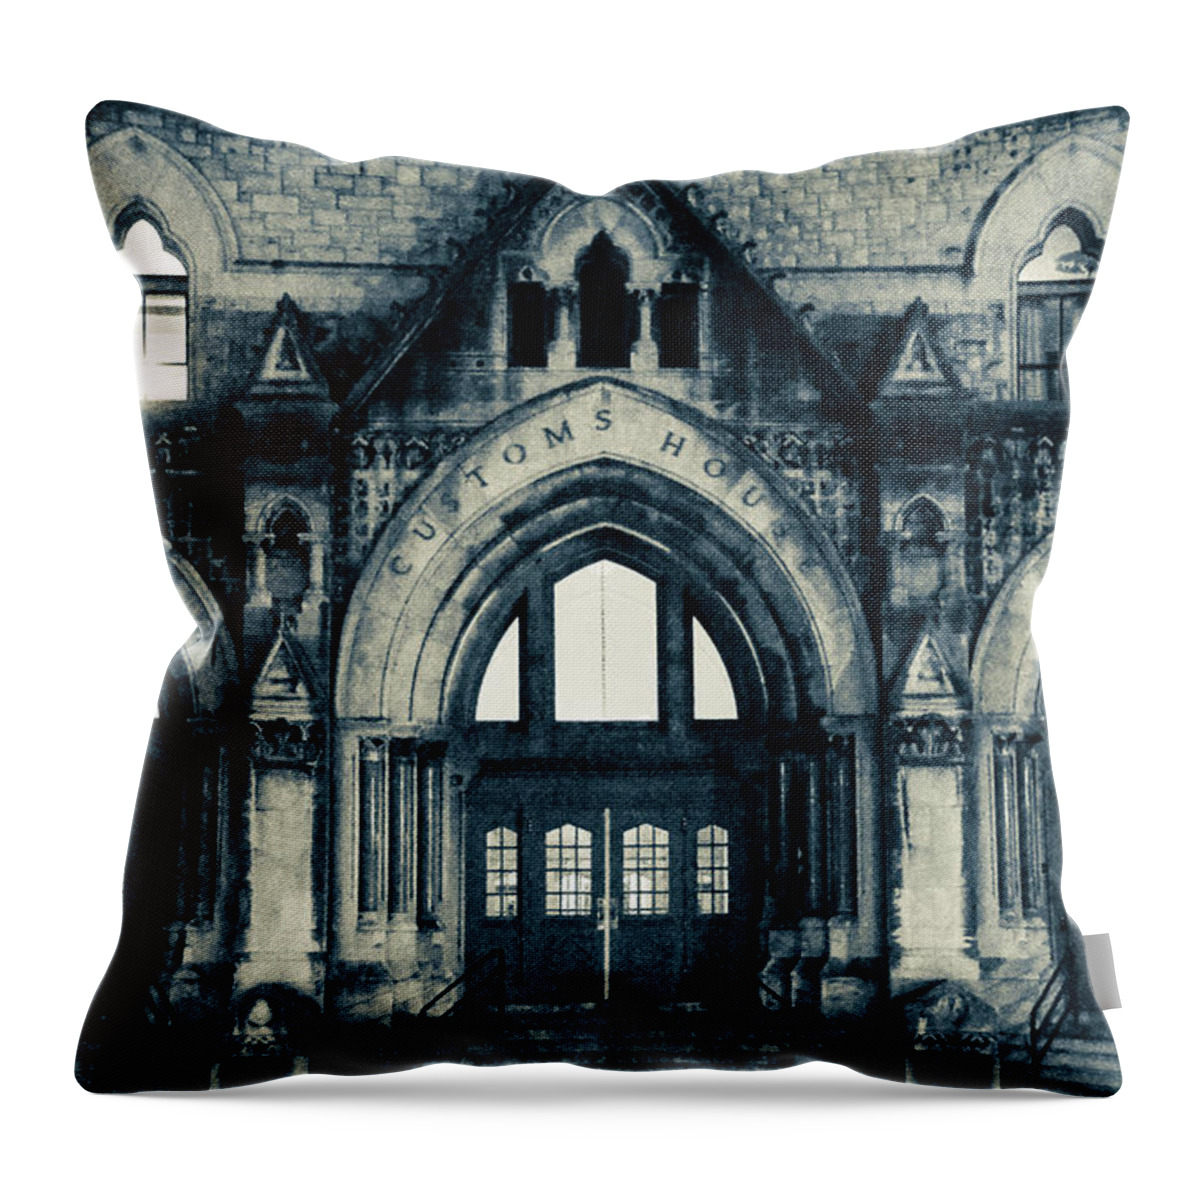 Reconstruction Throw Pillow featuring the photograph Nashville Customs House by Brian O'Kelly